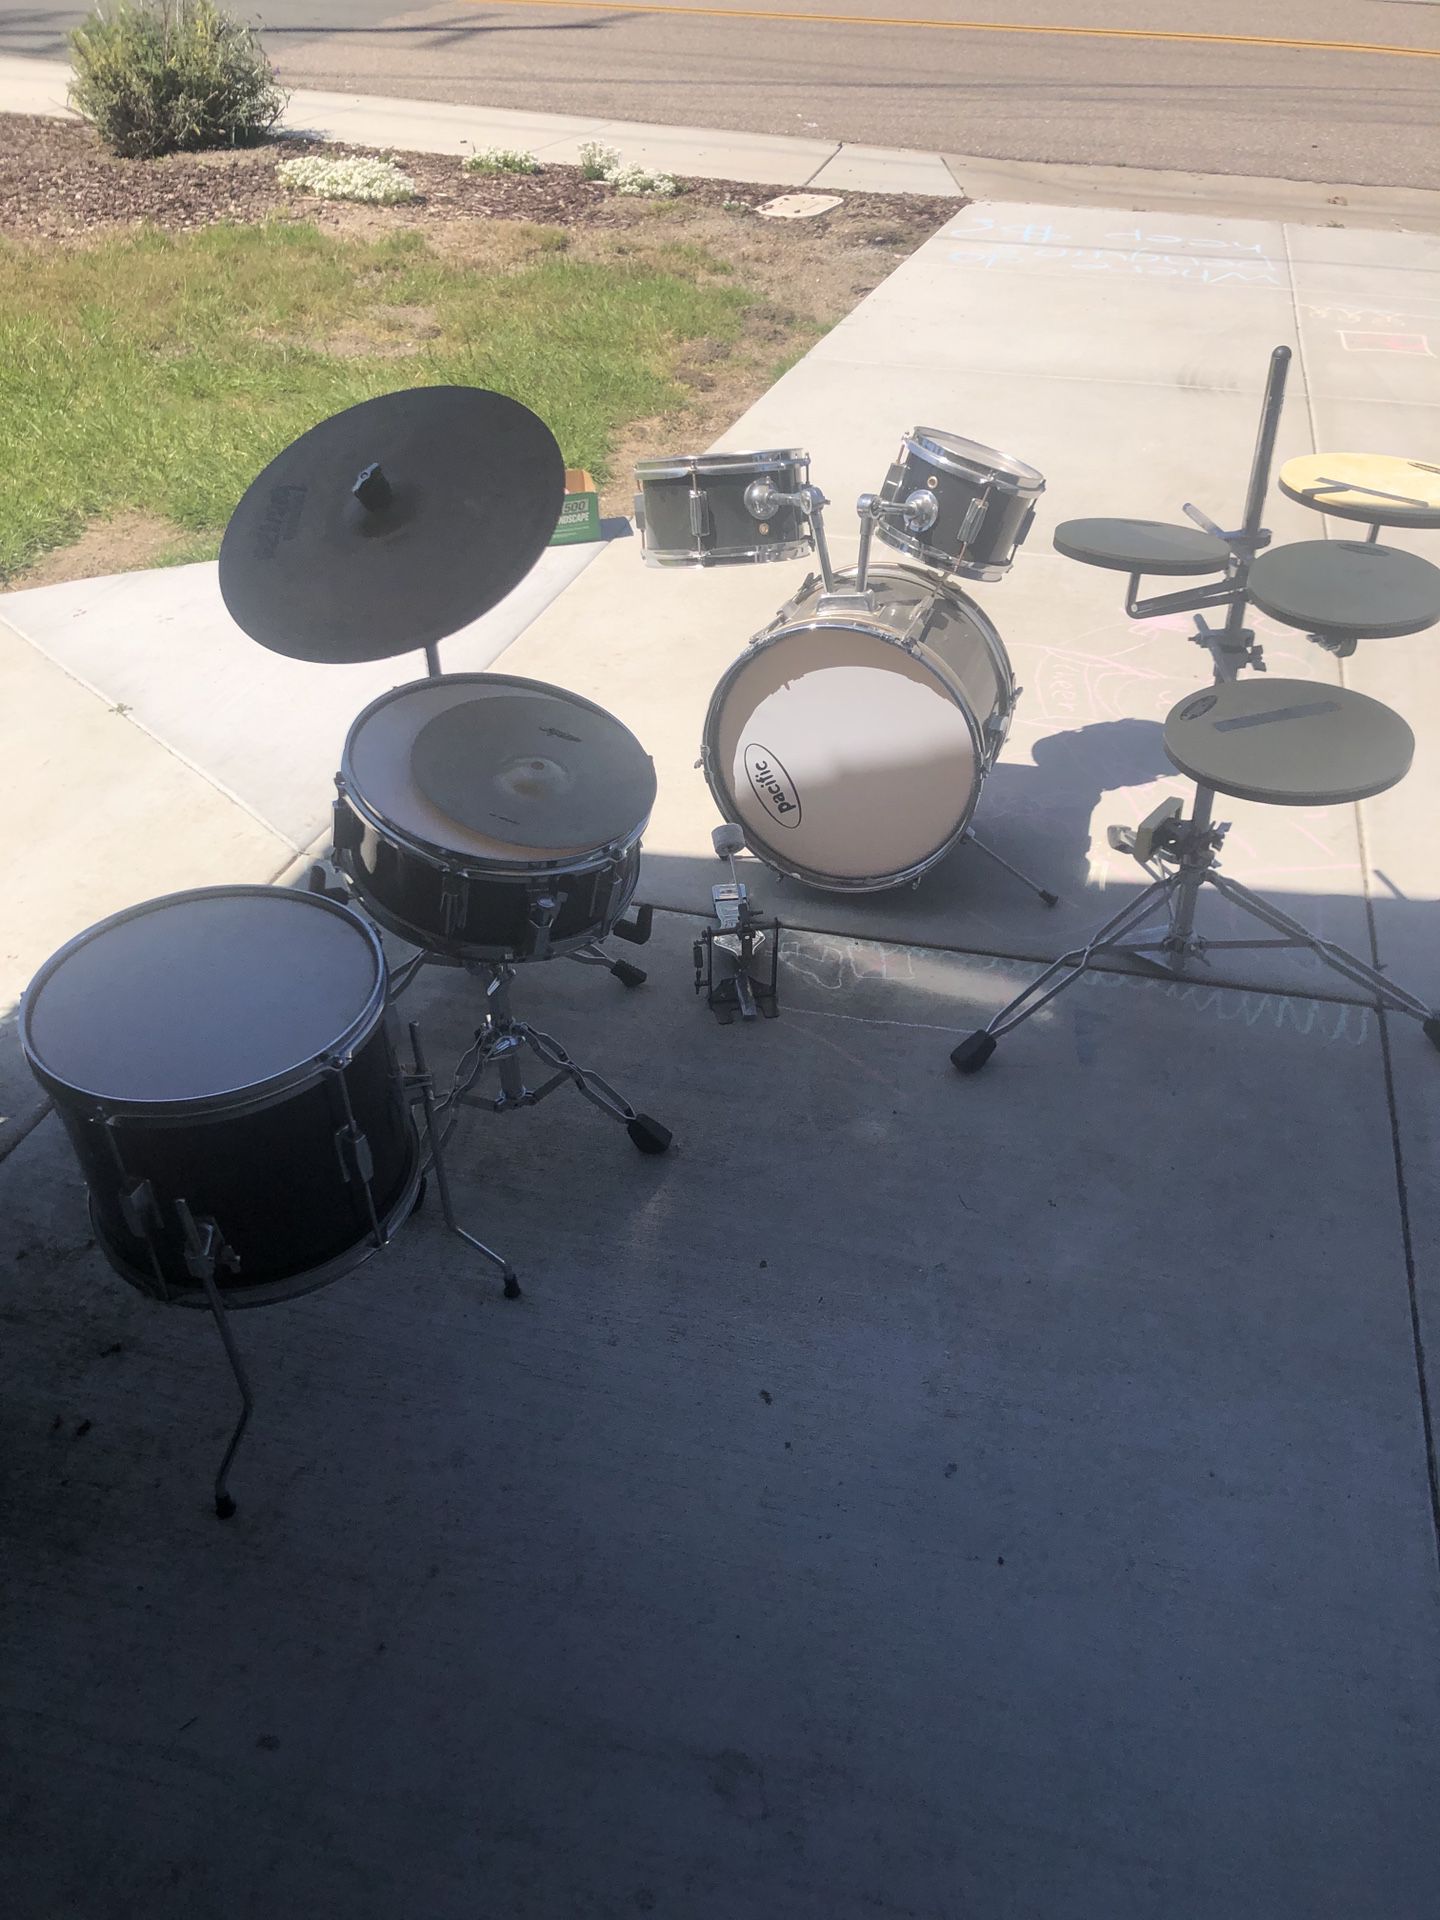 Drum set for sale. $70 or best offer. The practice pads are no longer available with the drum set.